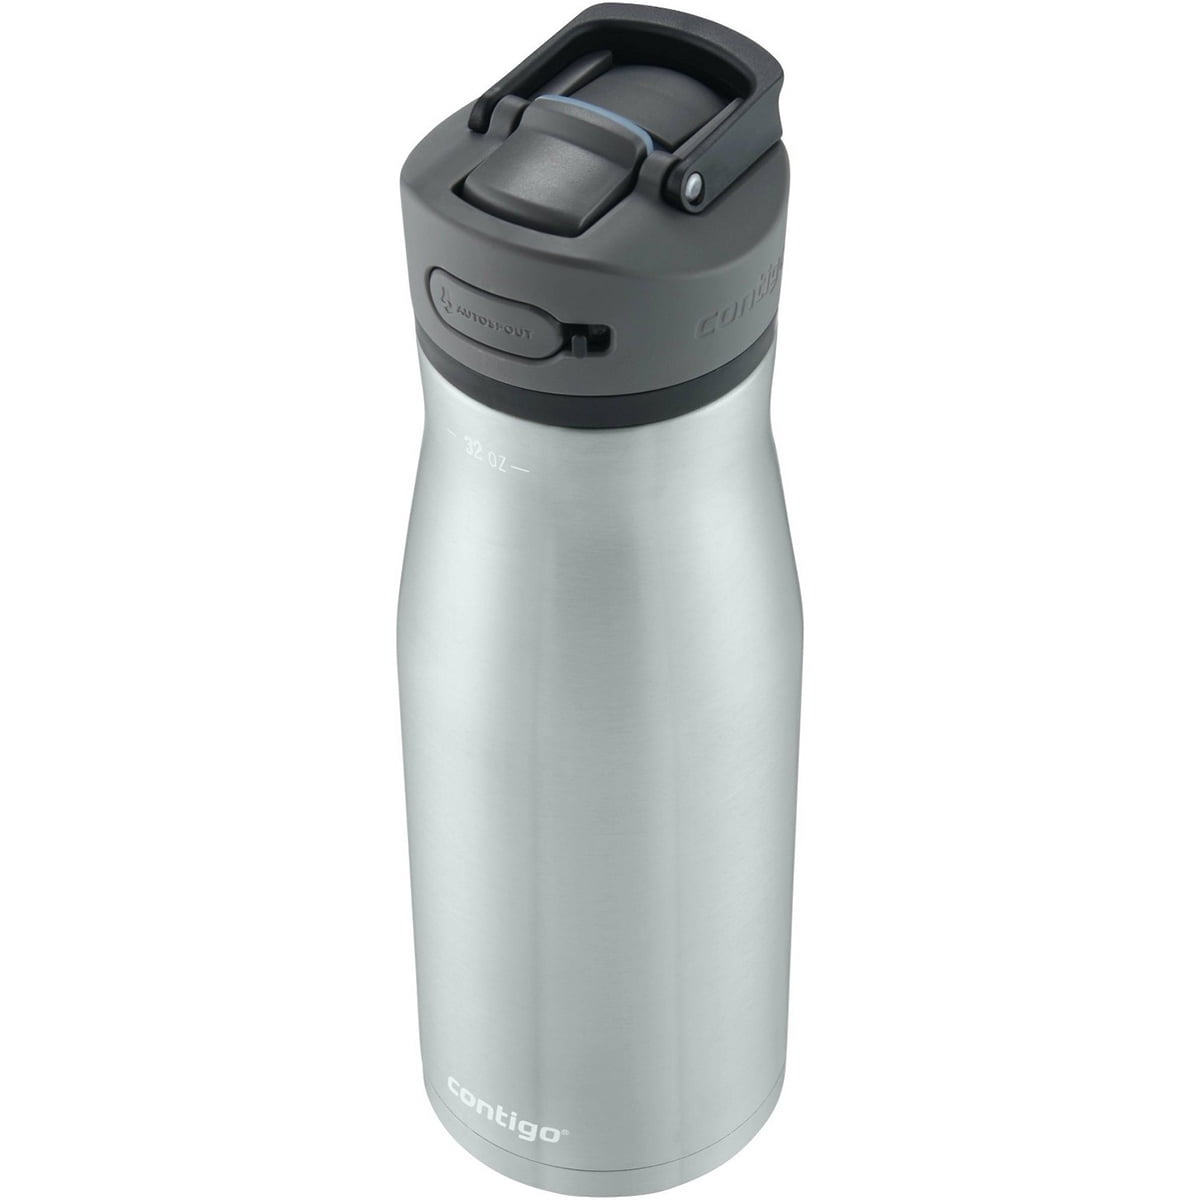 Cortland Chill 2.0, 32oz, Stainless Steel Water Bottle with AUTOSEAL® Lid